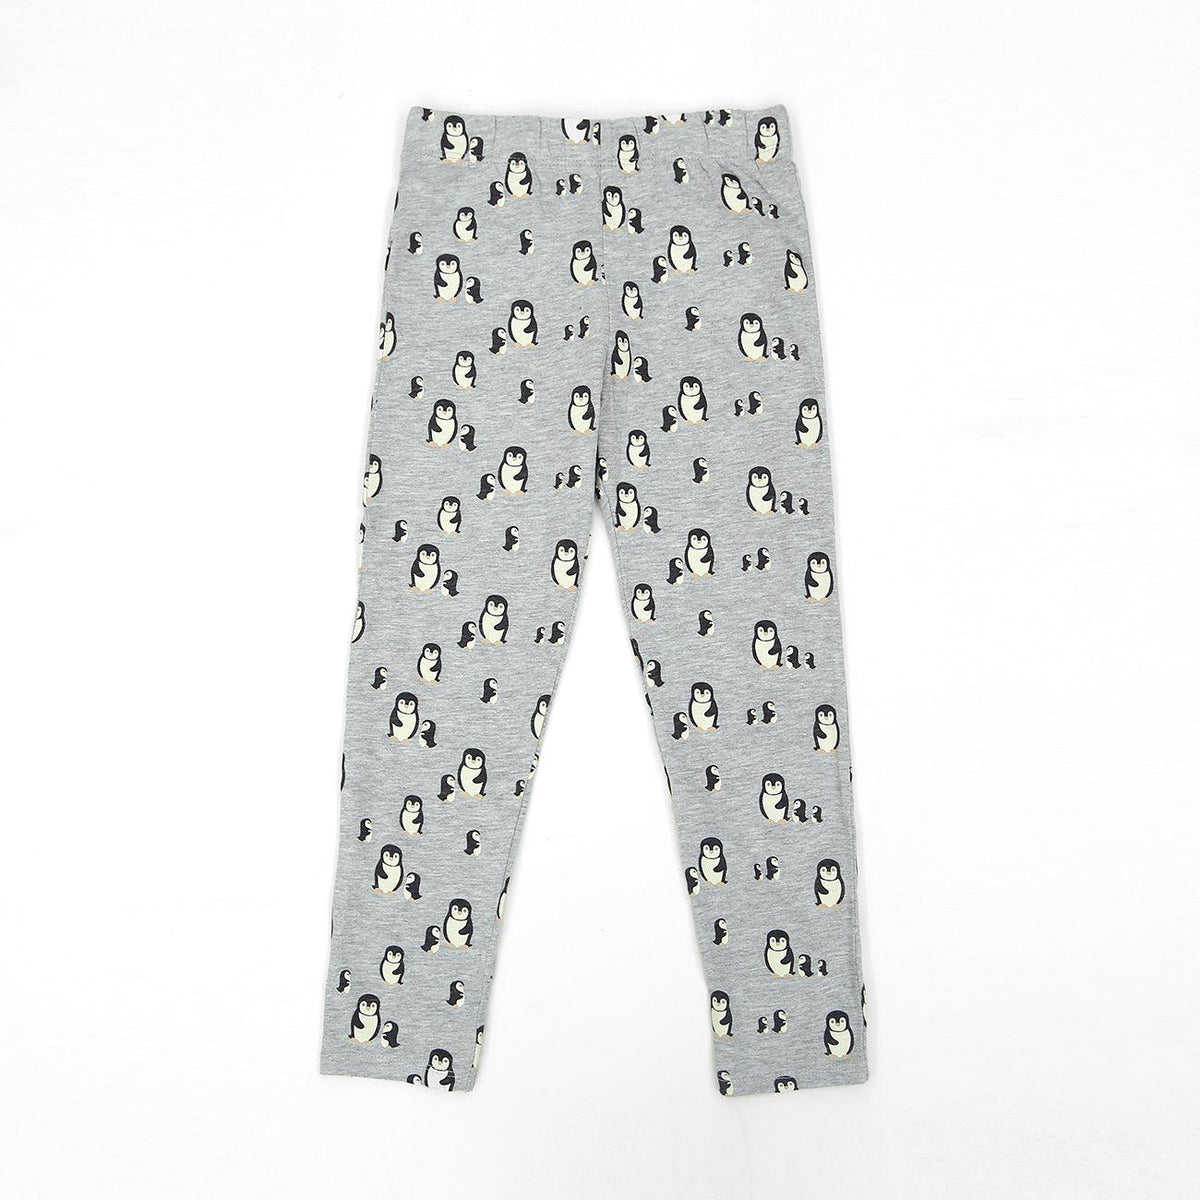 Imported All-Over Printed Grey Soft Cotton Legging For Girls 9-12 MONTH - 3-4 YRS (LE-11558) - Brands River